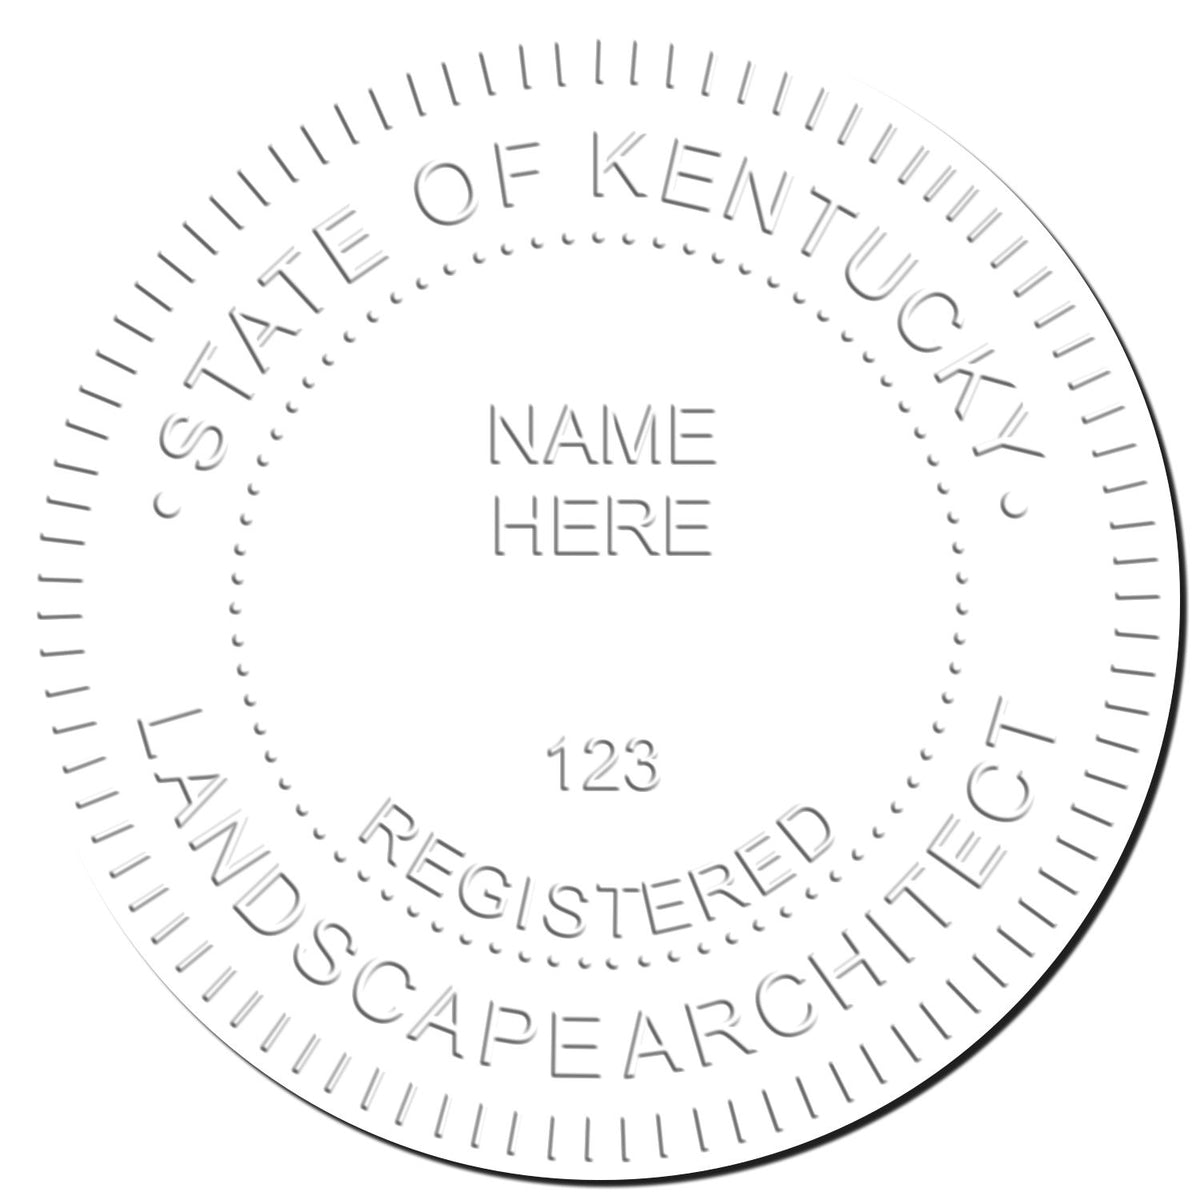 This paper is stamped with a sample imprint of the Soft Pocket Kentucky Landscape Architect Embosser, signifying its quality and reliability.